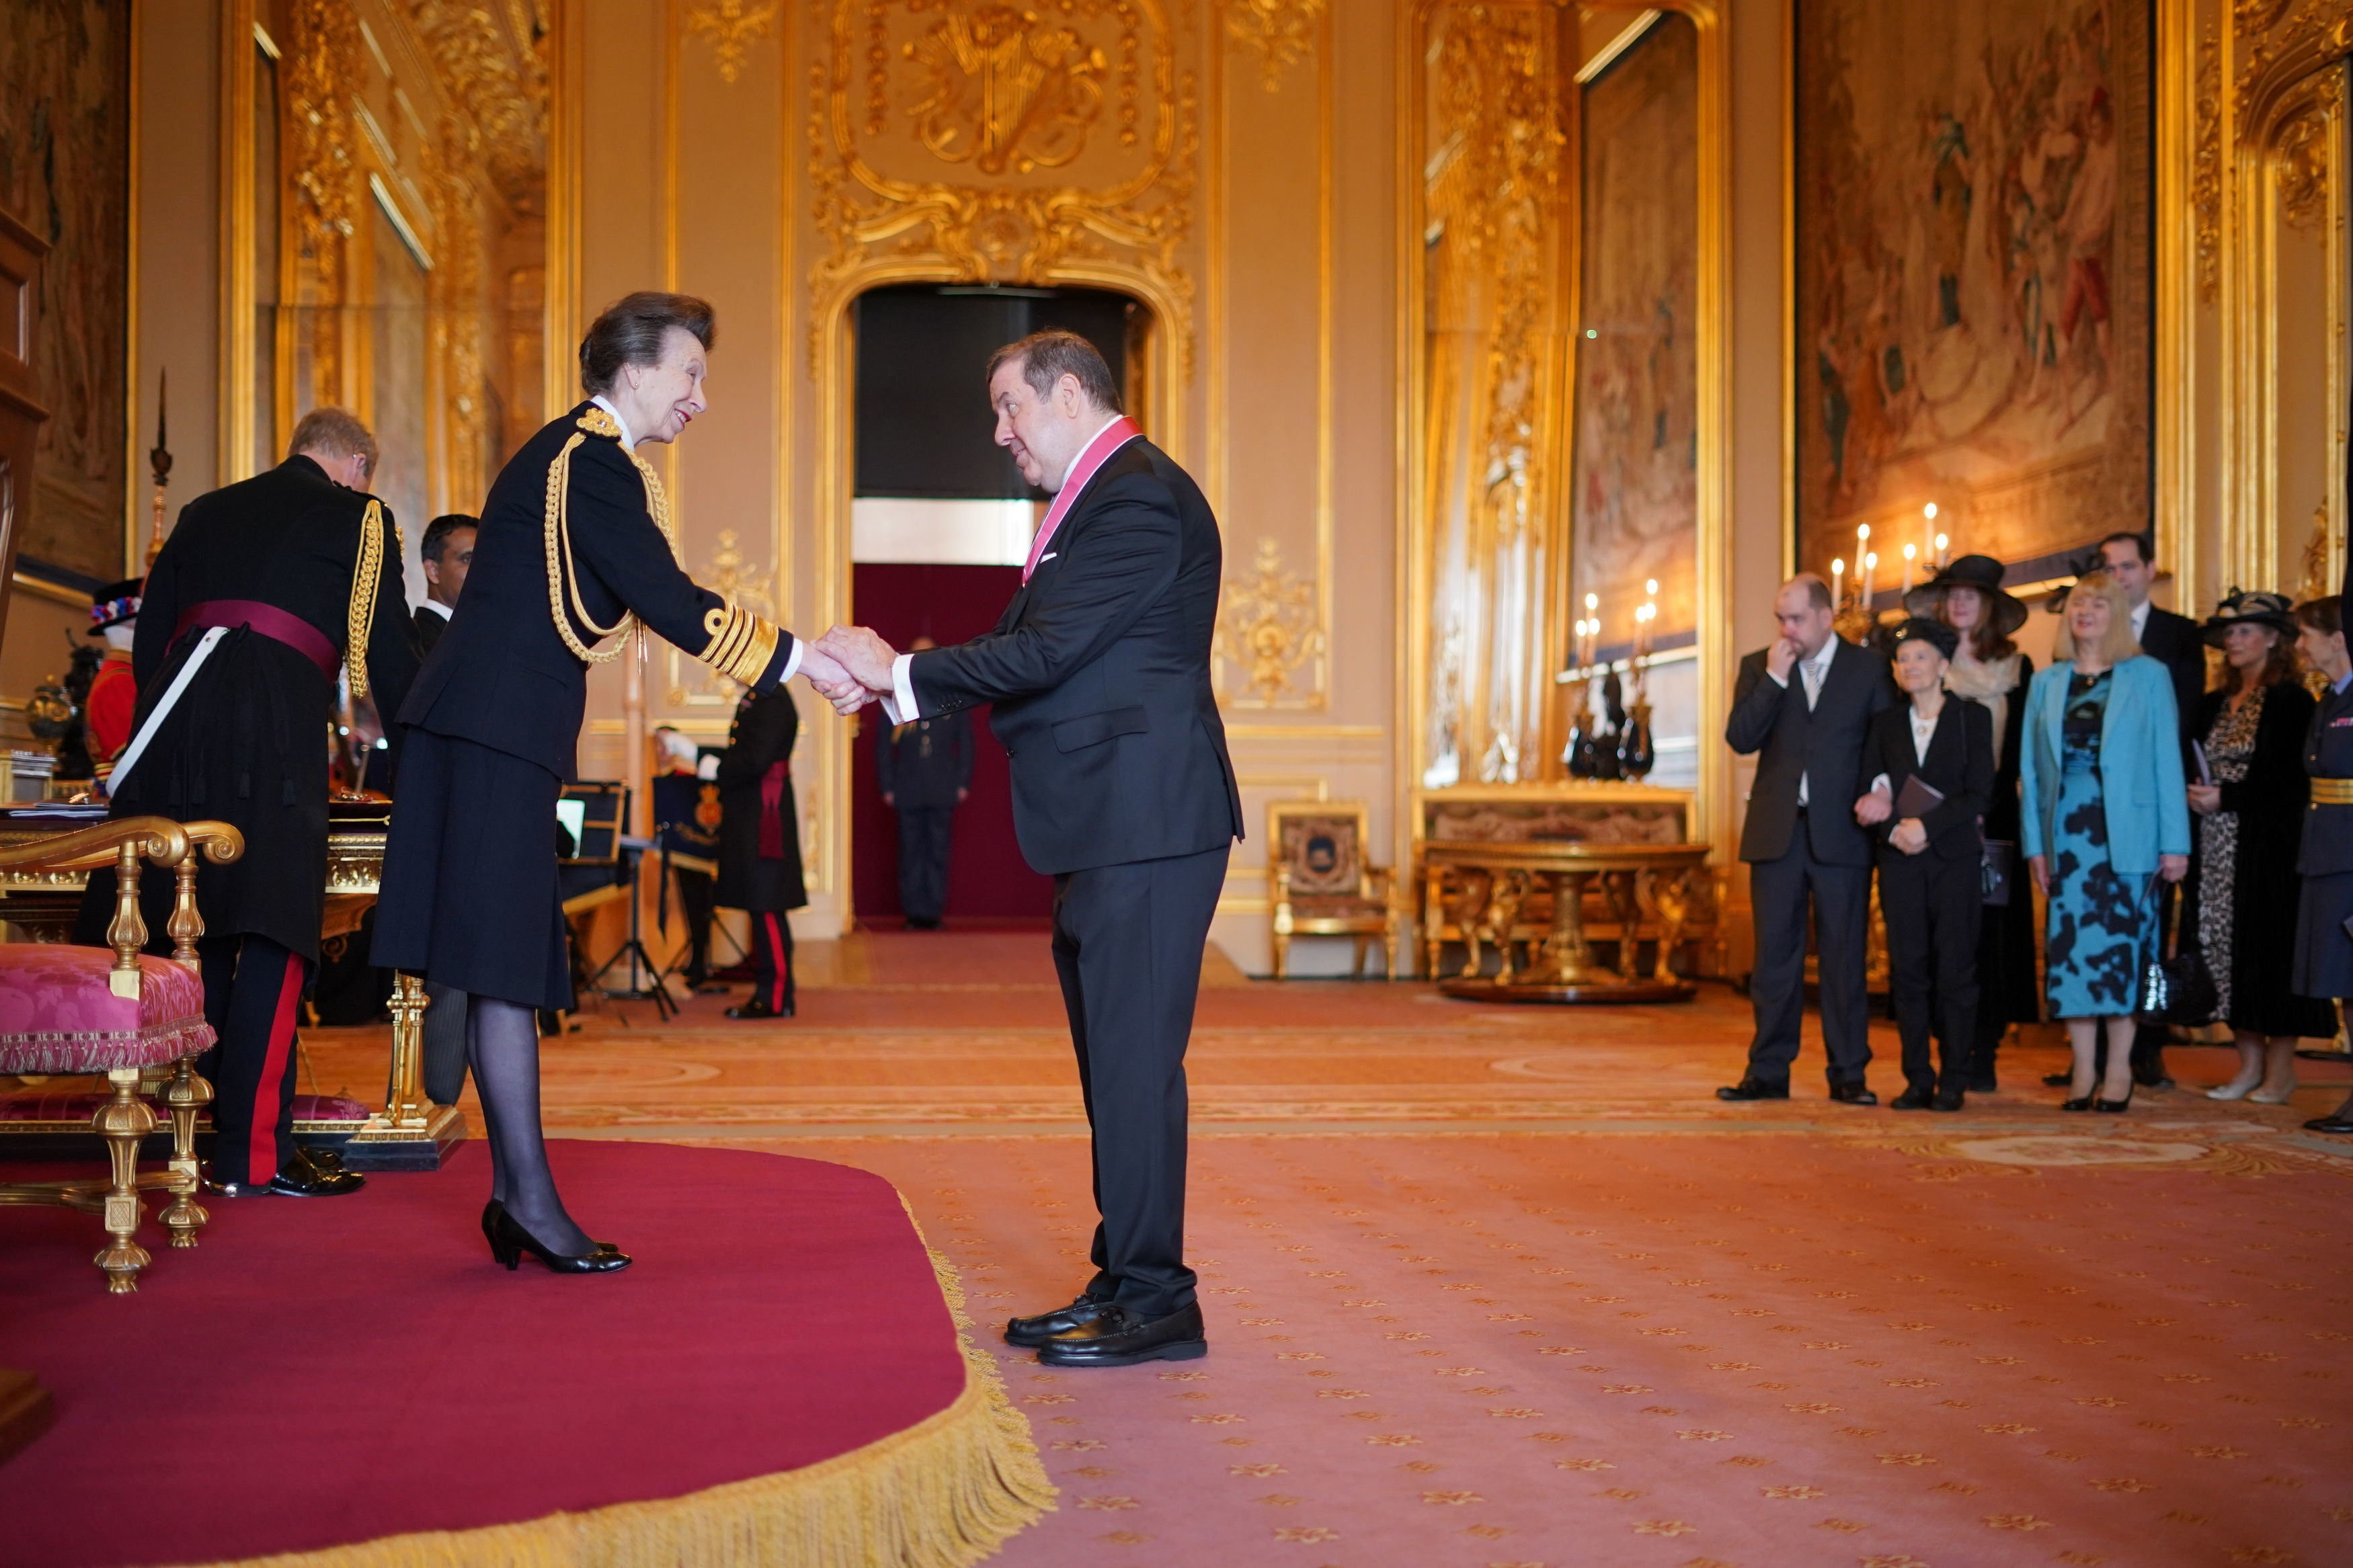 The Princess Royal carried out an investiture ceremony at Windsor Castle on Tuesday